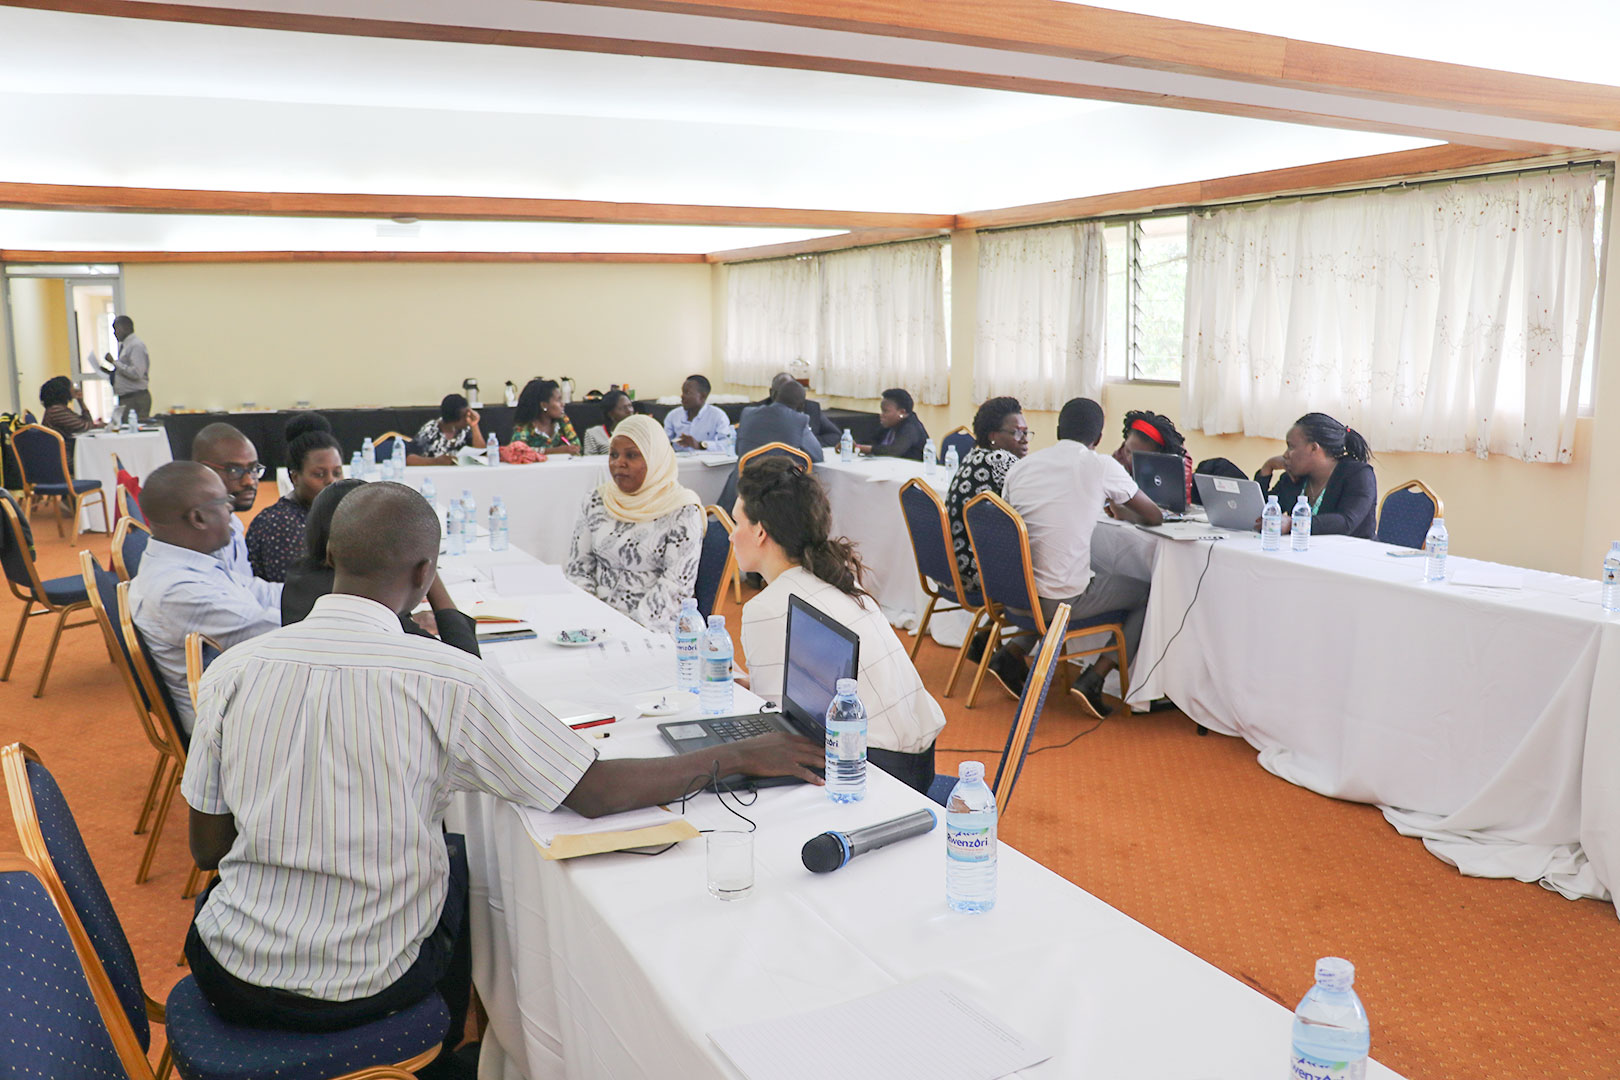 Participants at the workshop discuss challenges to stunting reduction in Uganda in focus groups.